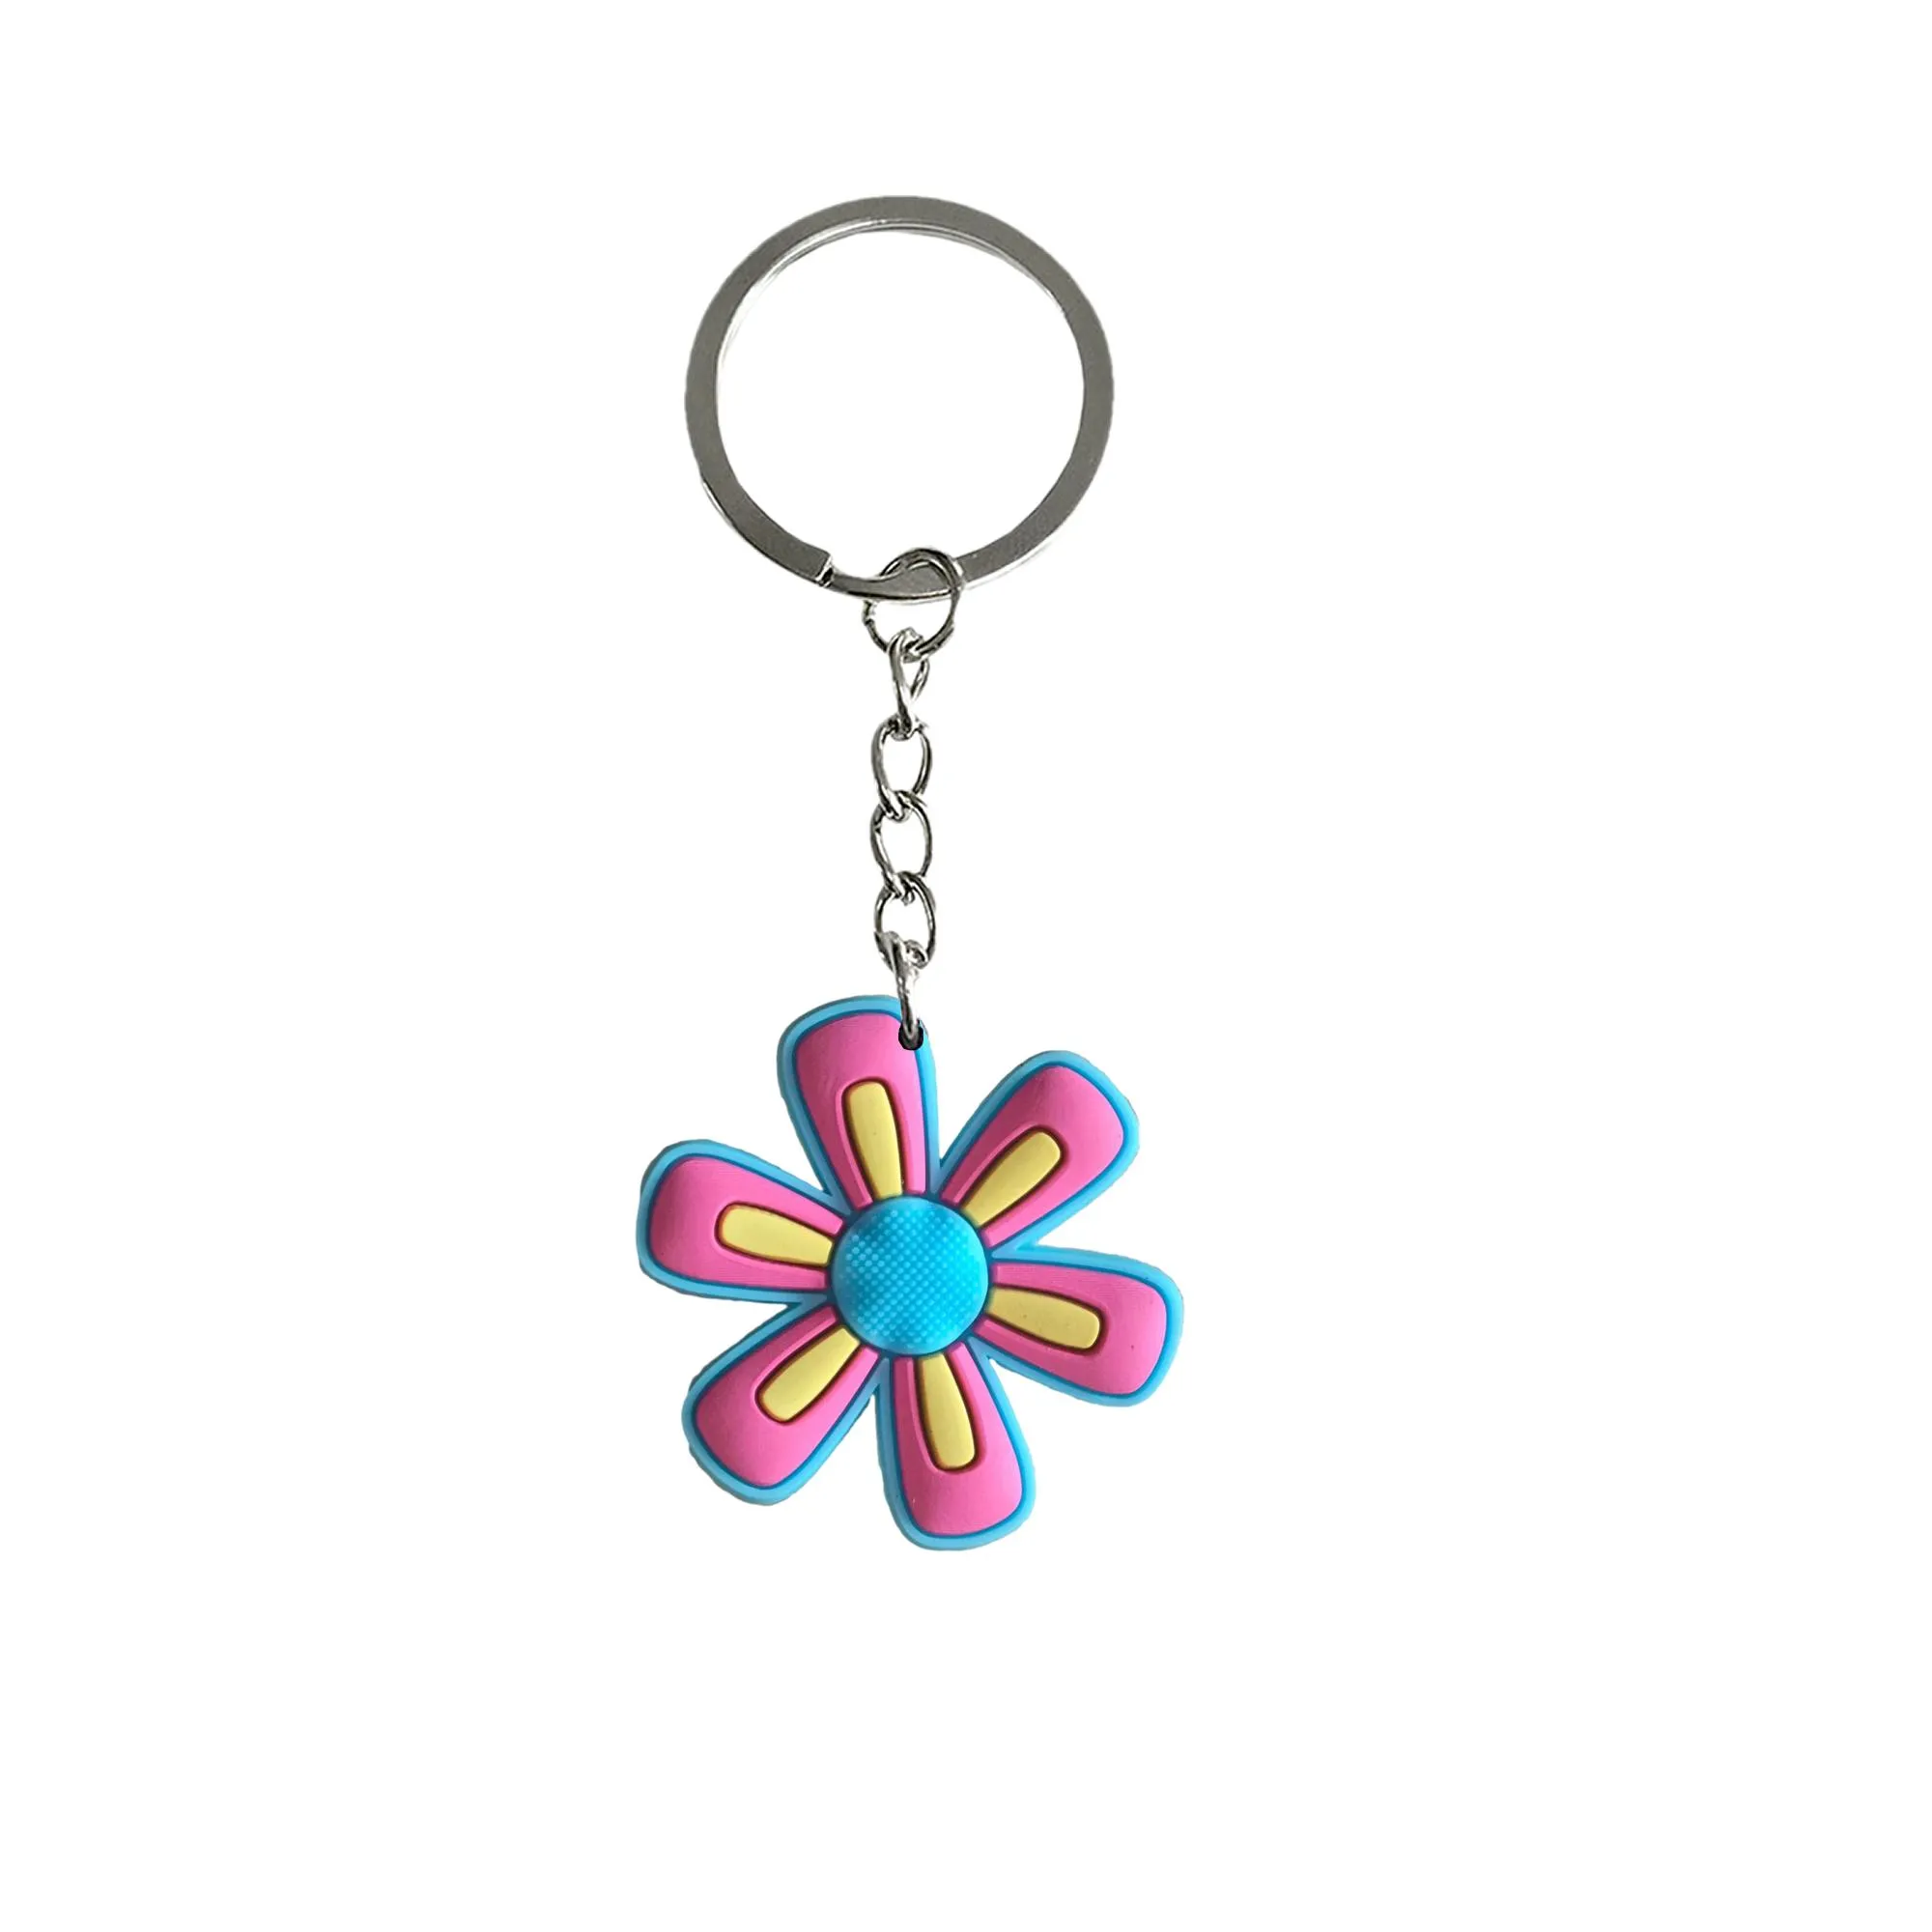 flower 11 keychain keyring for backpacks key ring girls anime cool keychains suitable schoolbag rings boys pendants accessories kids birthday party favors